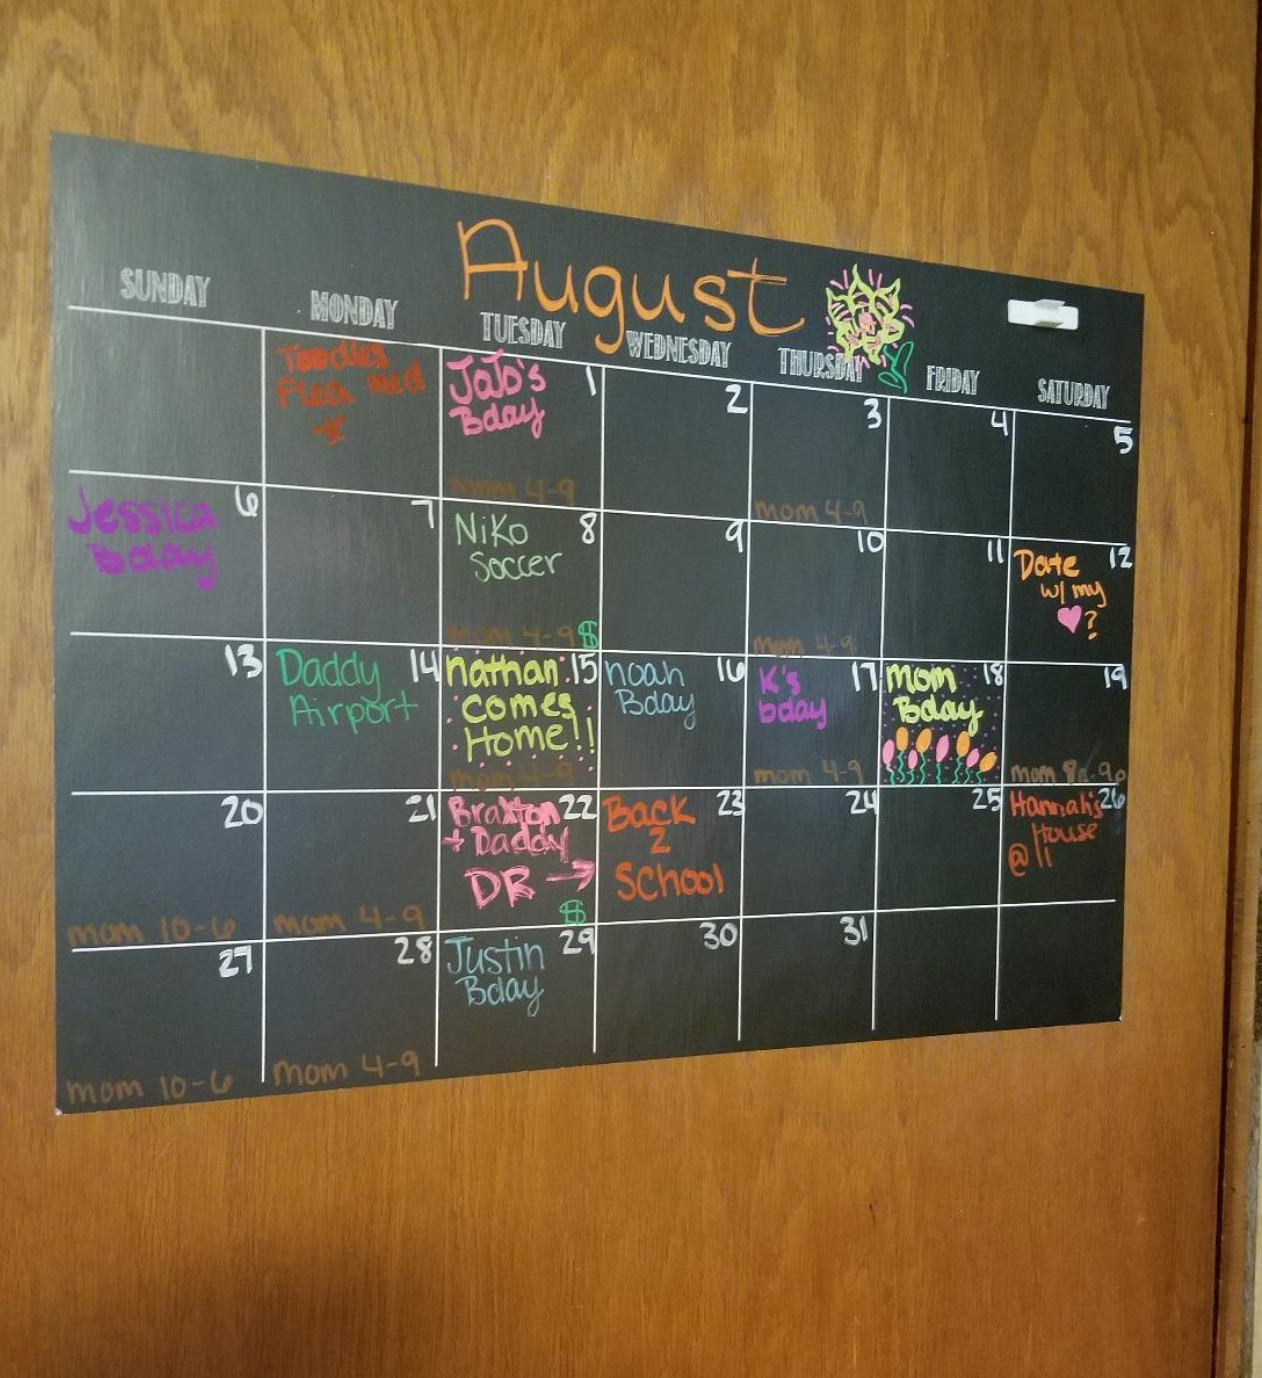 A black calendar with colorful pen writing dates and events on it adhered to a wall 